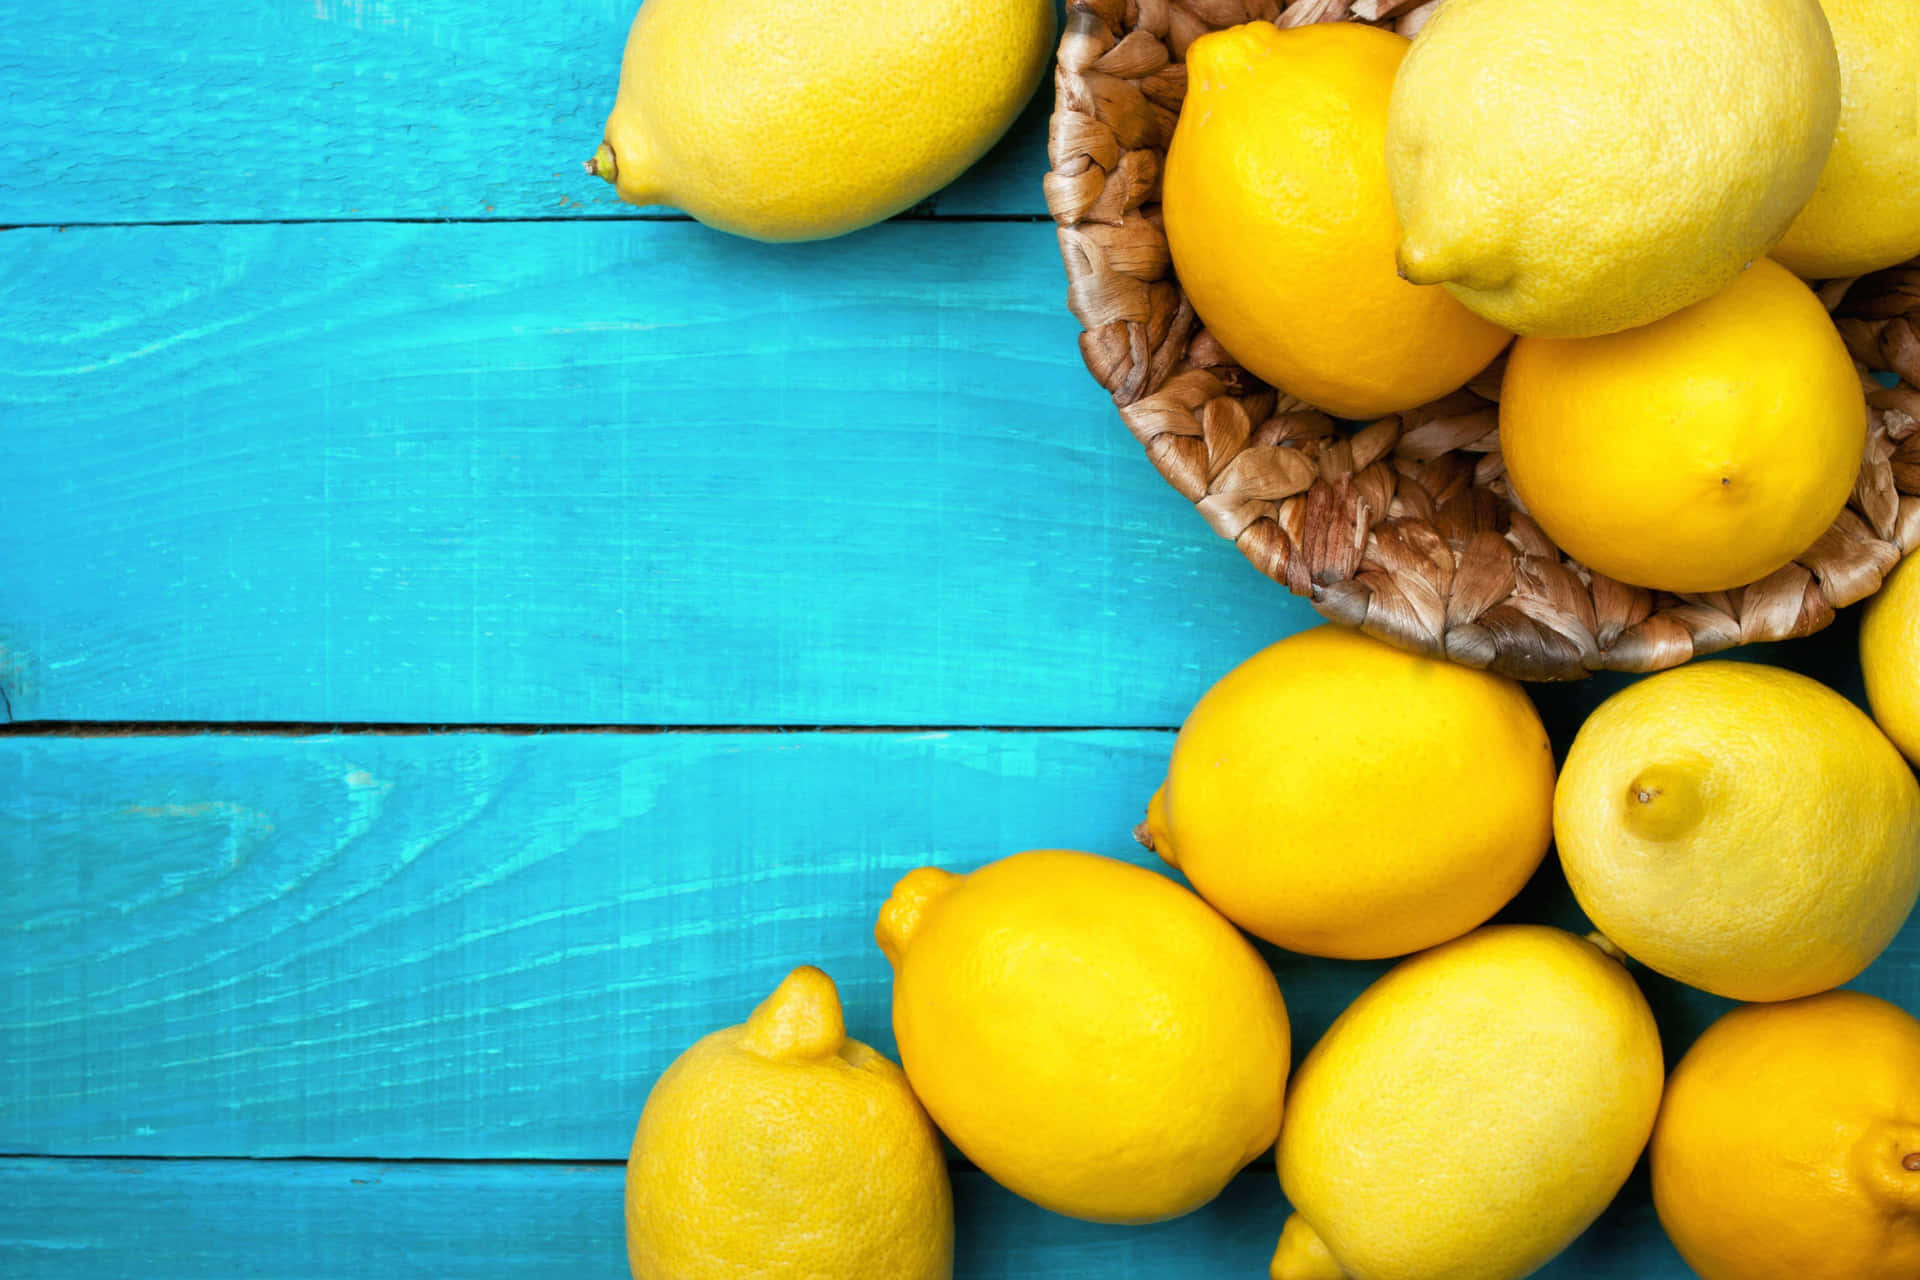 Refresh your body with a clean slice of lemon!